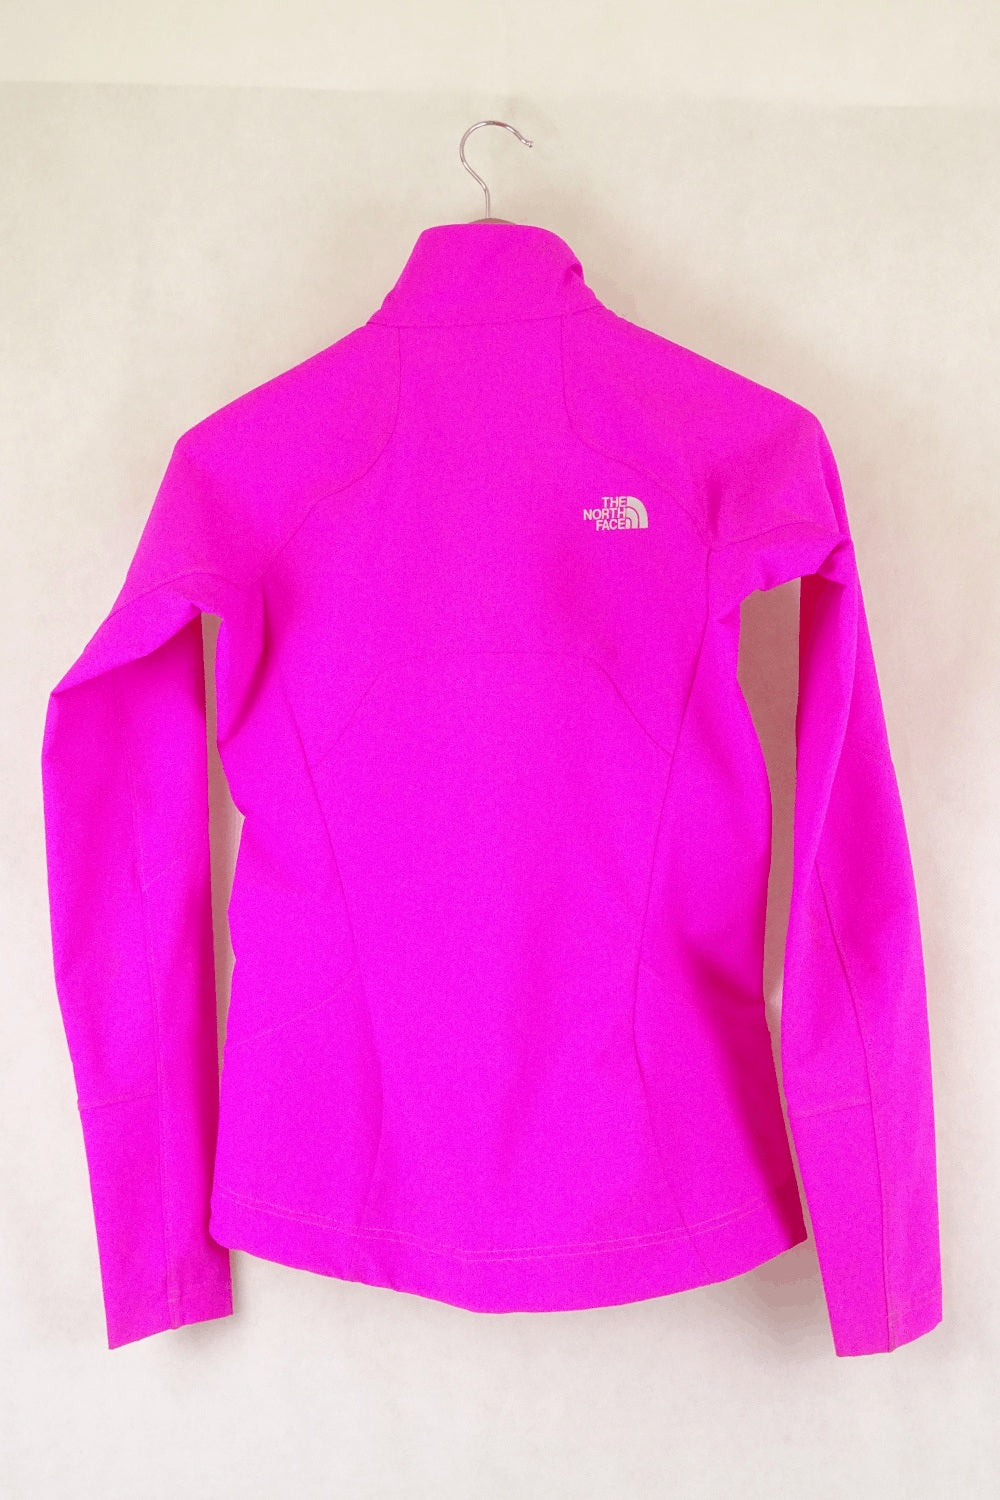 The North Face Pink Jacket 6